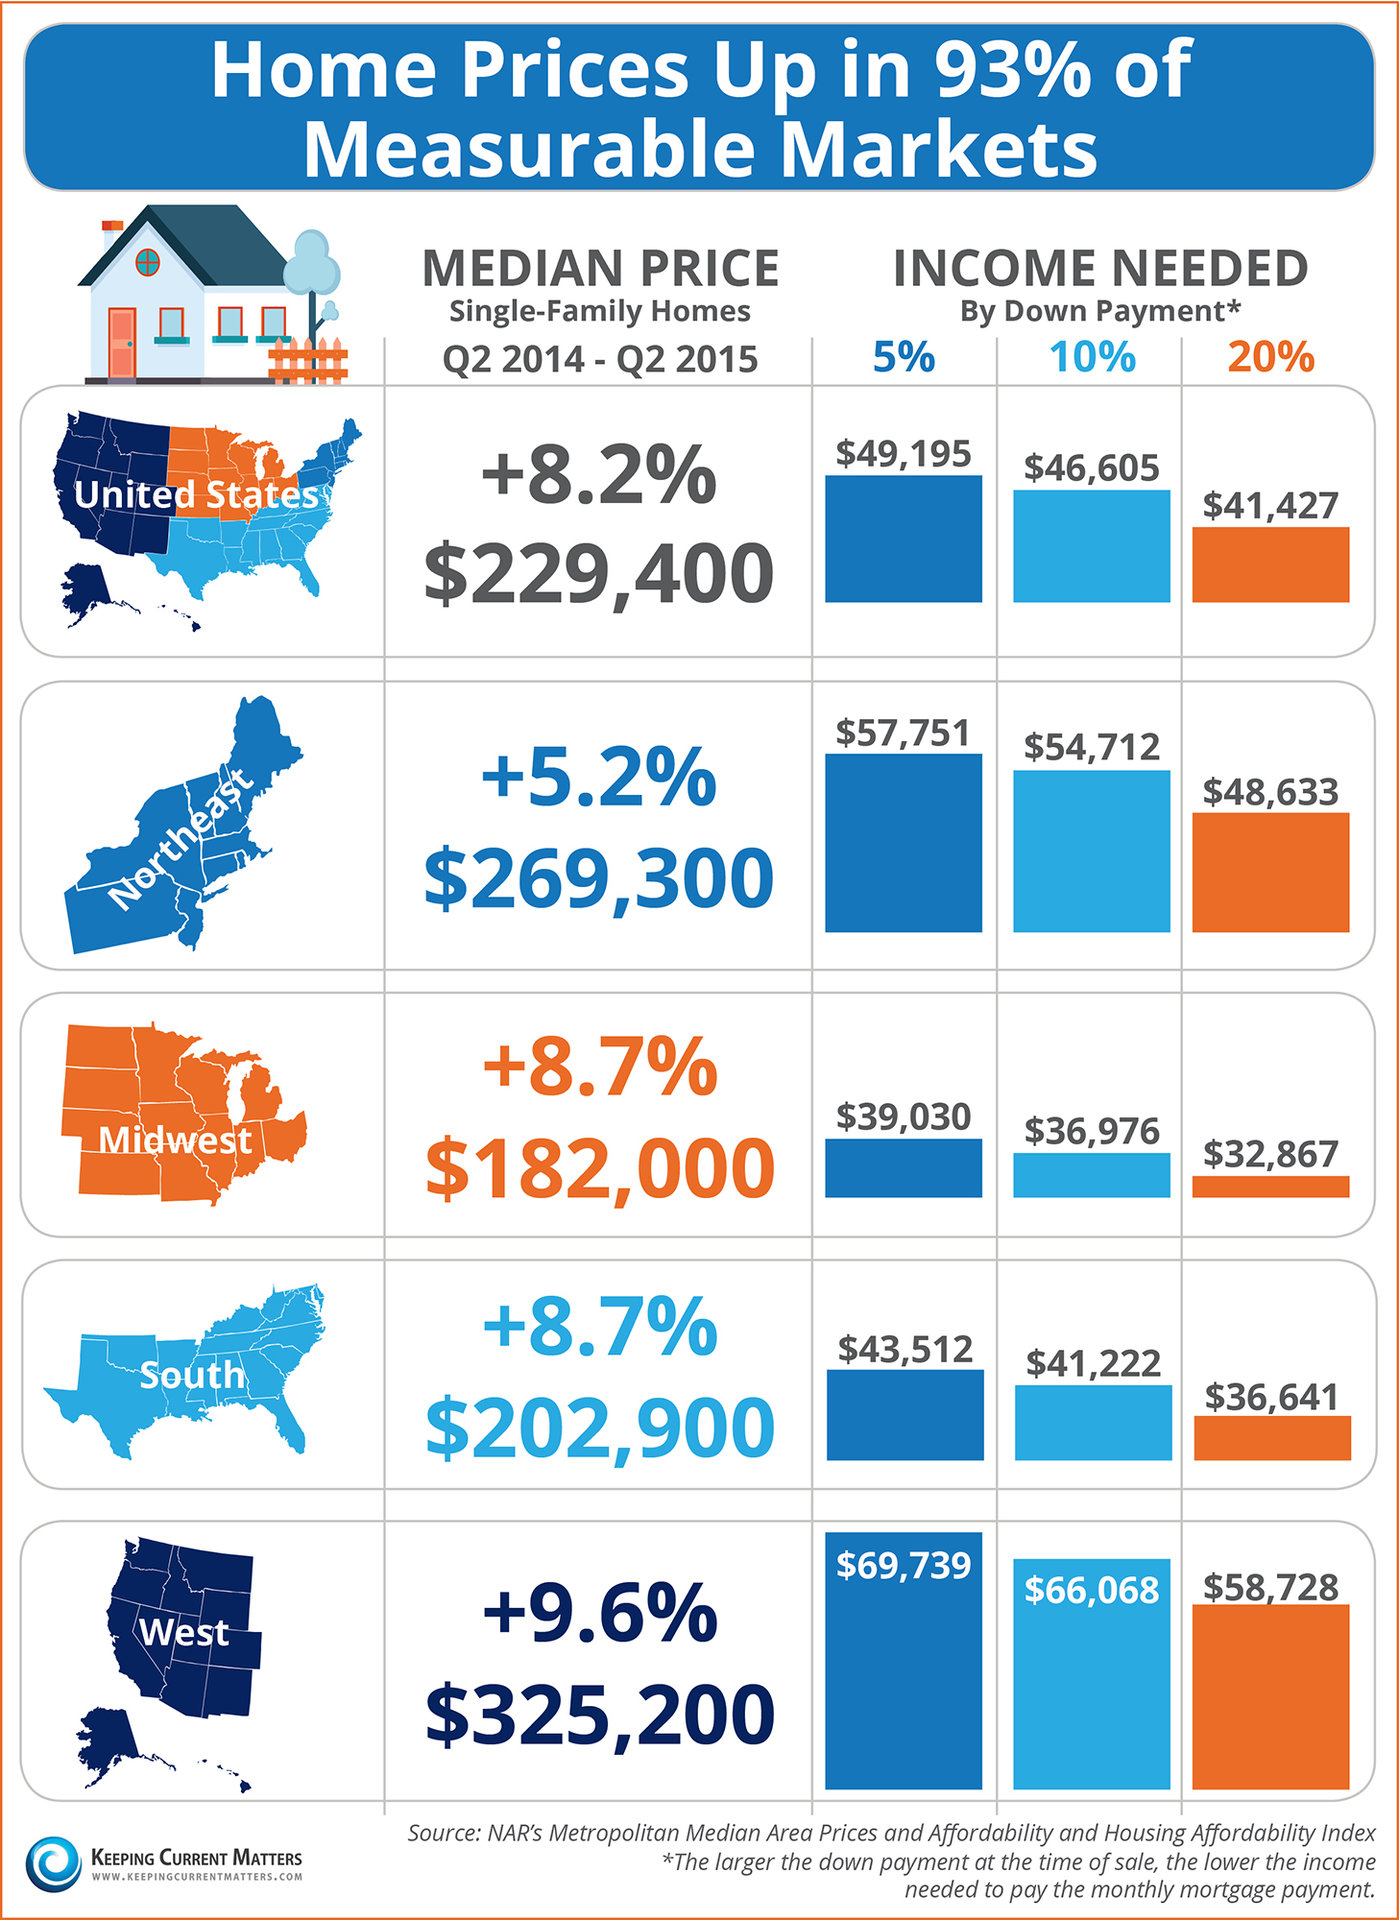 Home Prices and Real Estate Market infographic